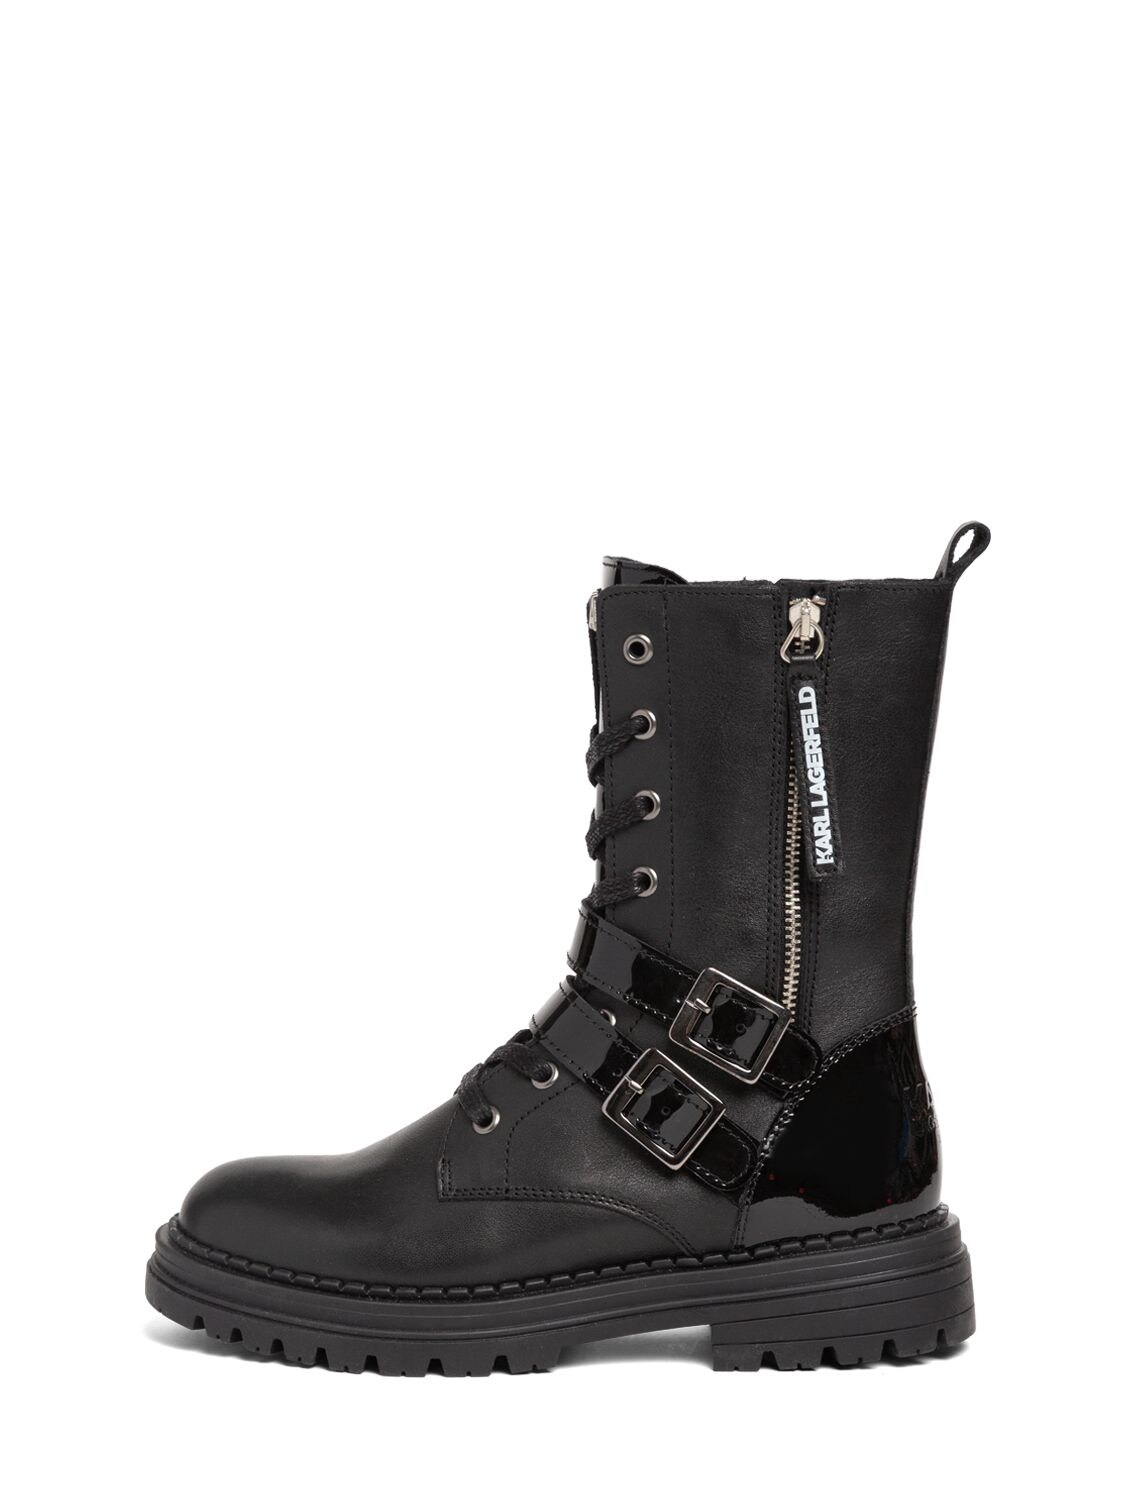 KARL LAGERFELD LEATHER BOOTS W/LOGO